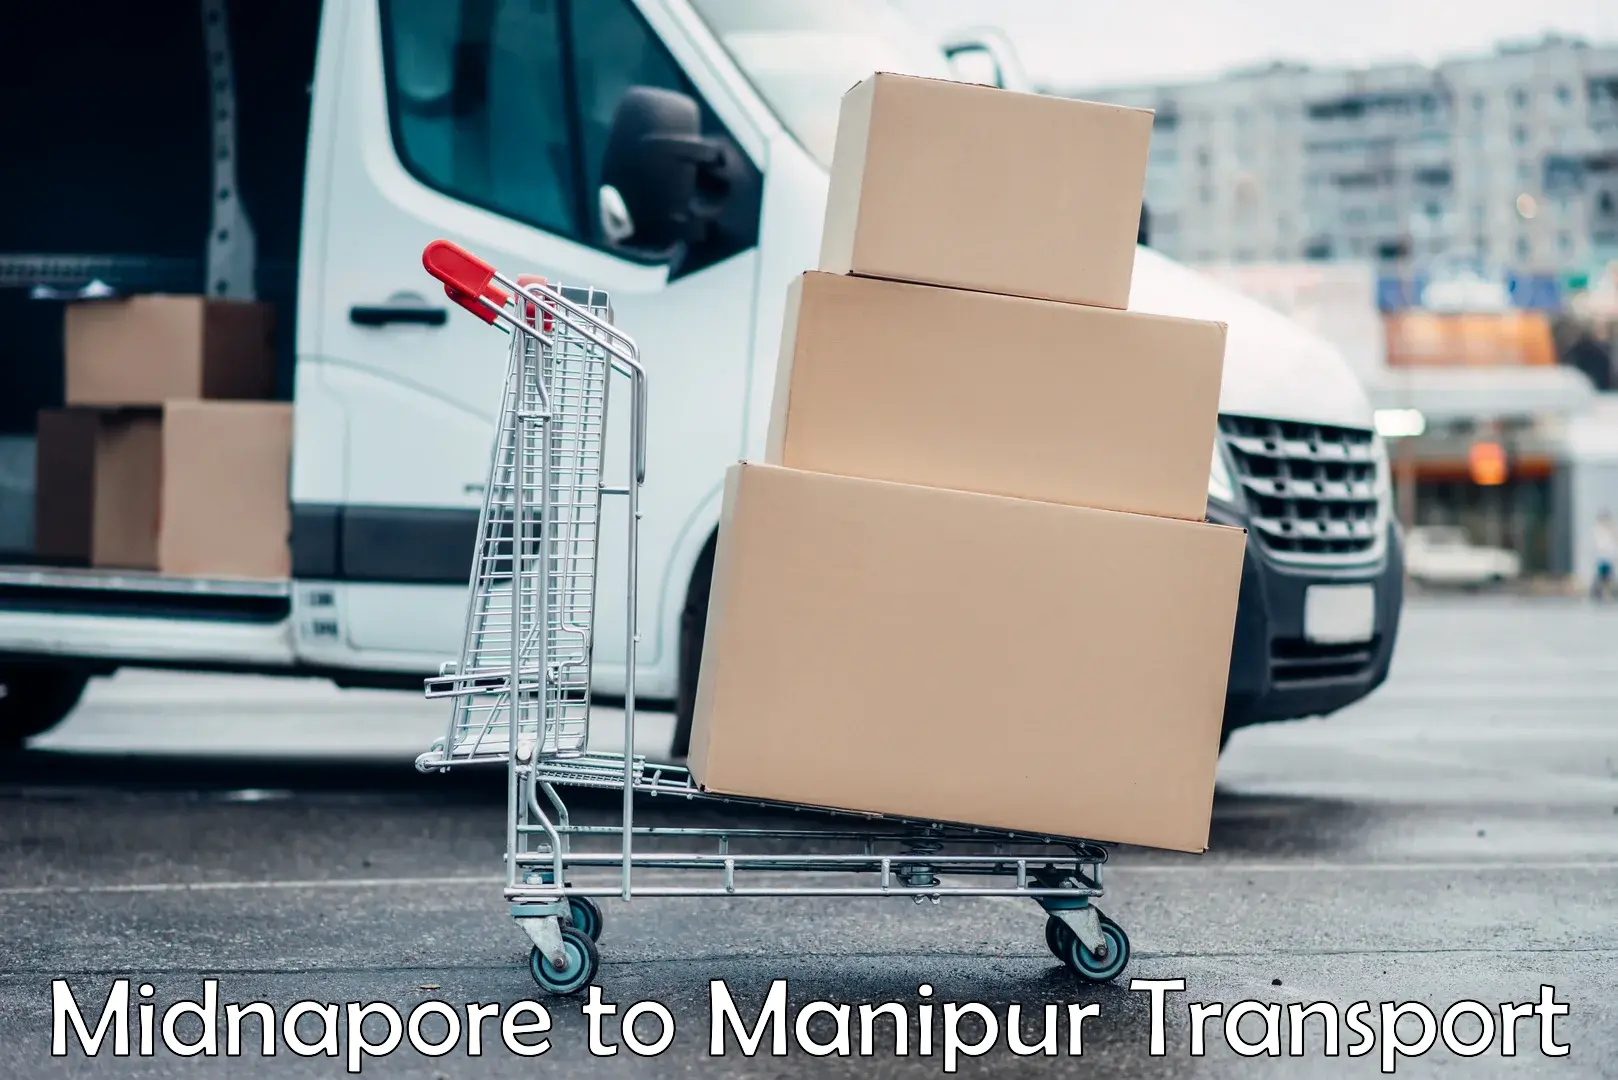 Transportation services in Midnapore to Manipur